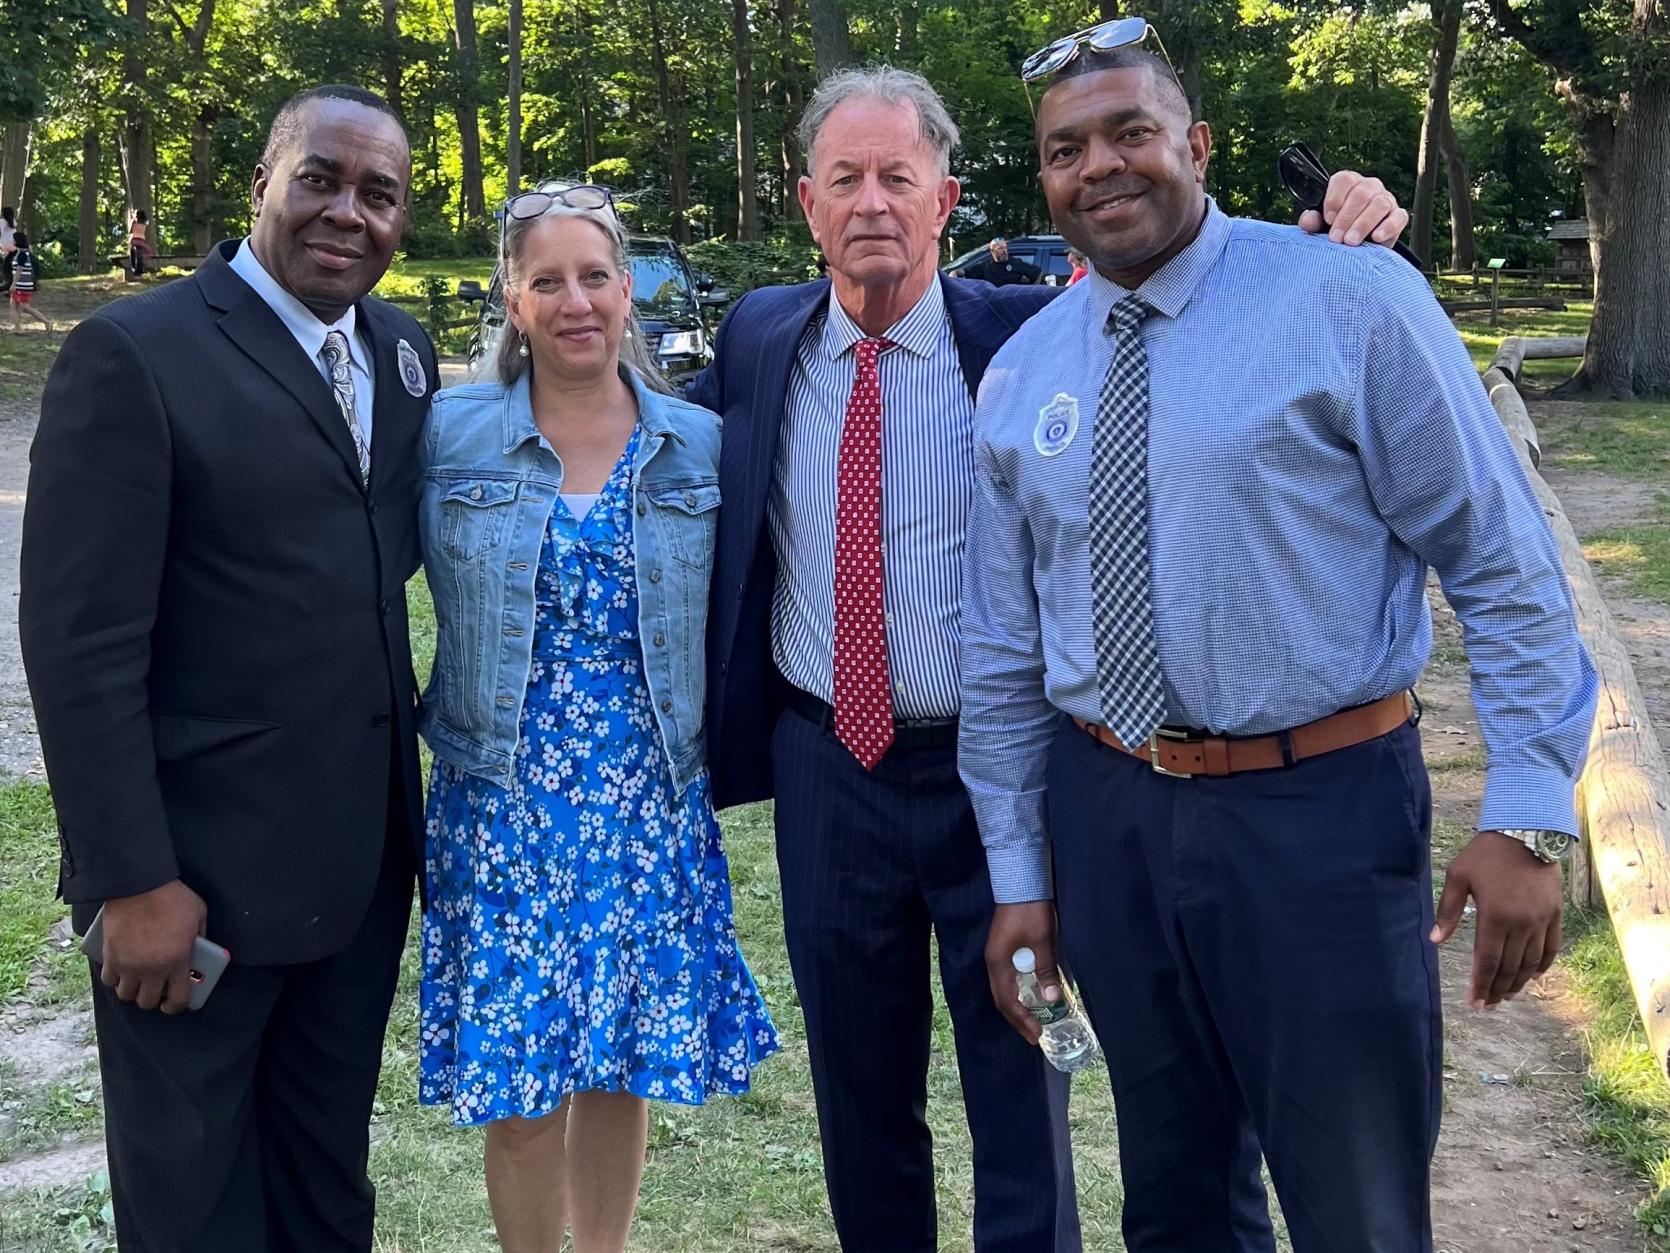 Four people pose for a picture (From left to right: Paul Nwokeji, Dianne Fasano, First Justice Joseph Johnston, and Reginald Vibert)